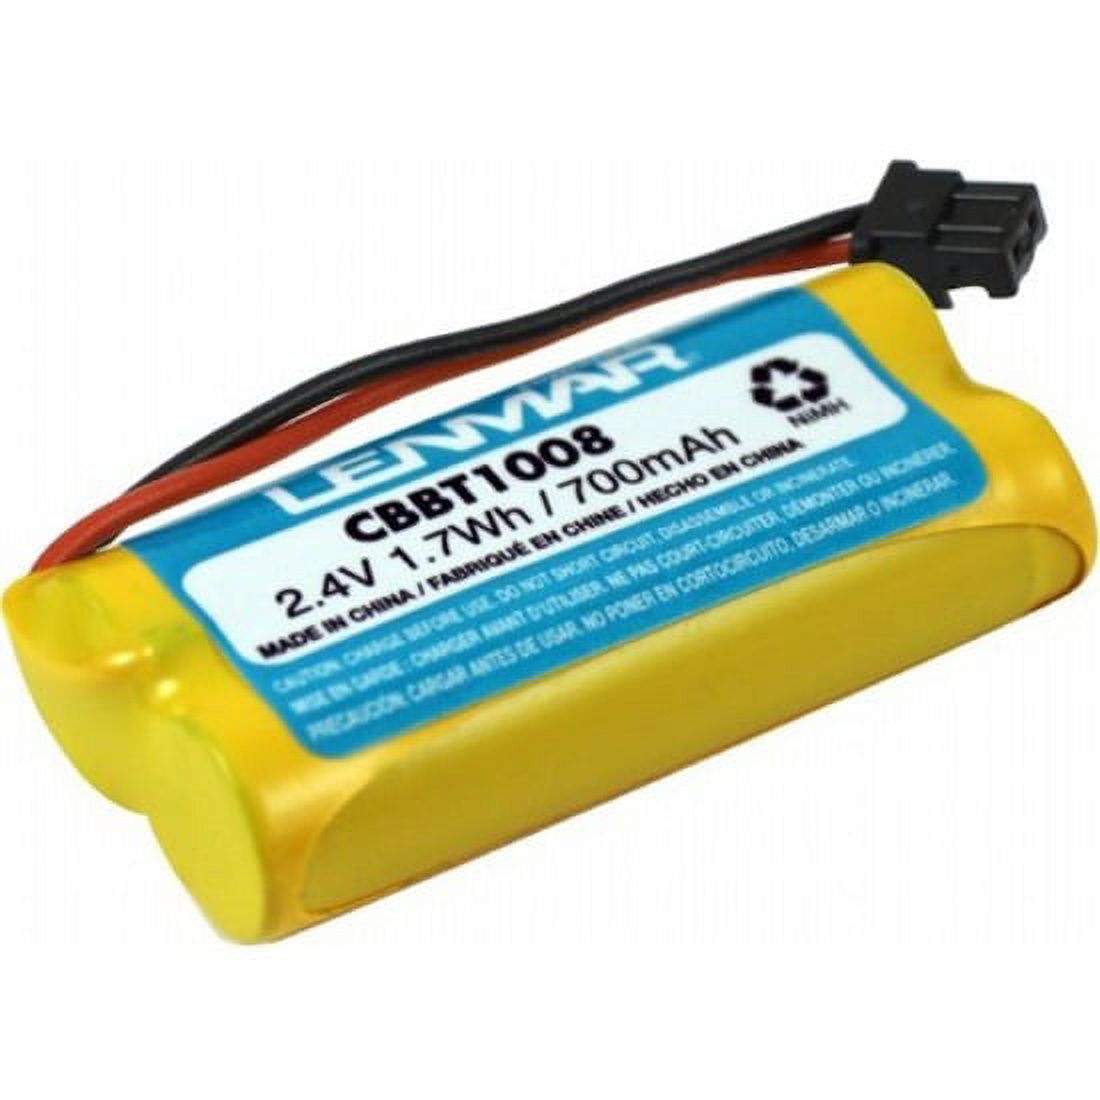 CBBT1008 Cordless Phone Battery - image 1 of 1